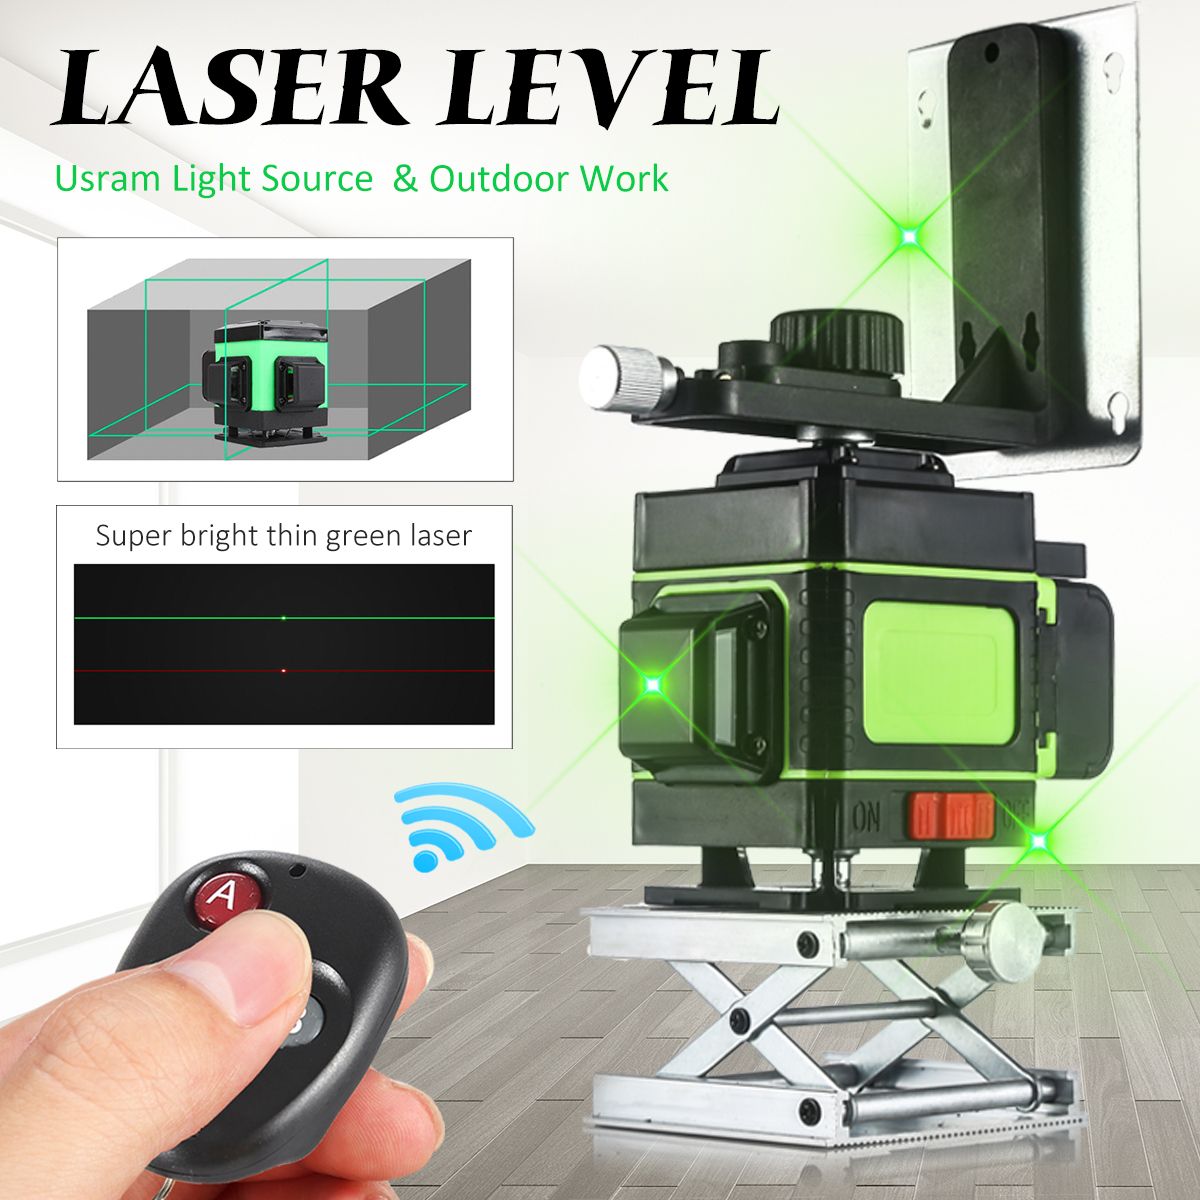 12-Lines-Laser-Level-Measuring-DevicesLine-360-Degree-Rotary-Horizontal-And-Vertical-Cross-Laser-Lev-1548770